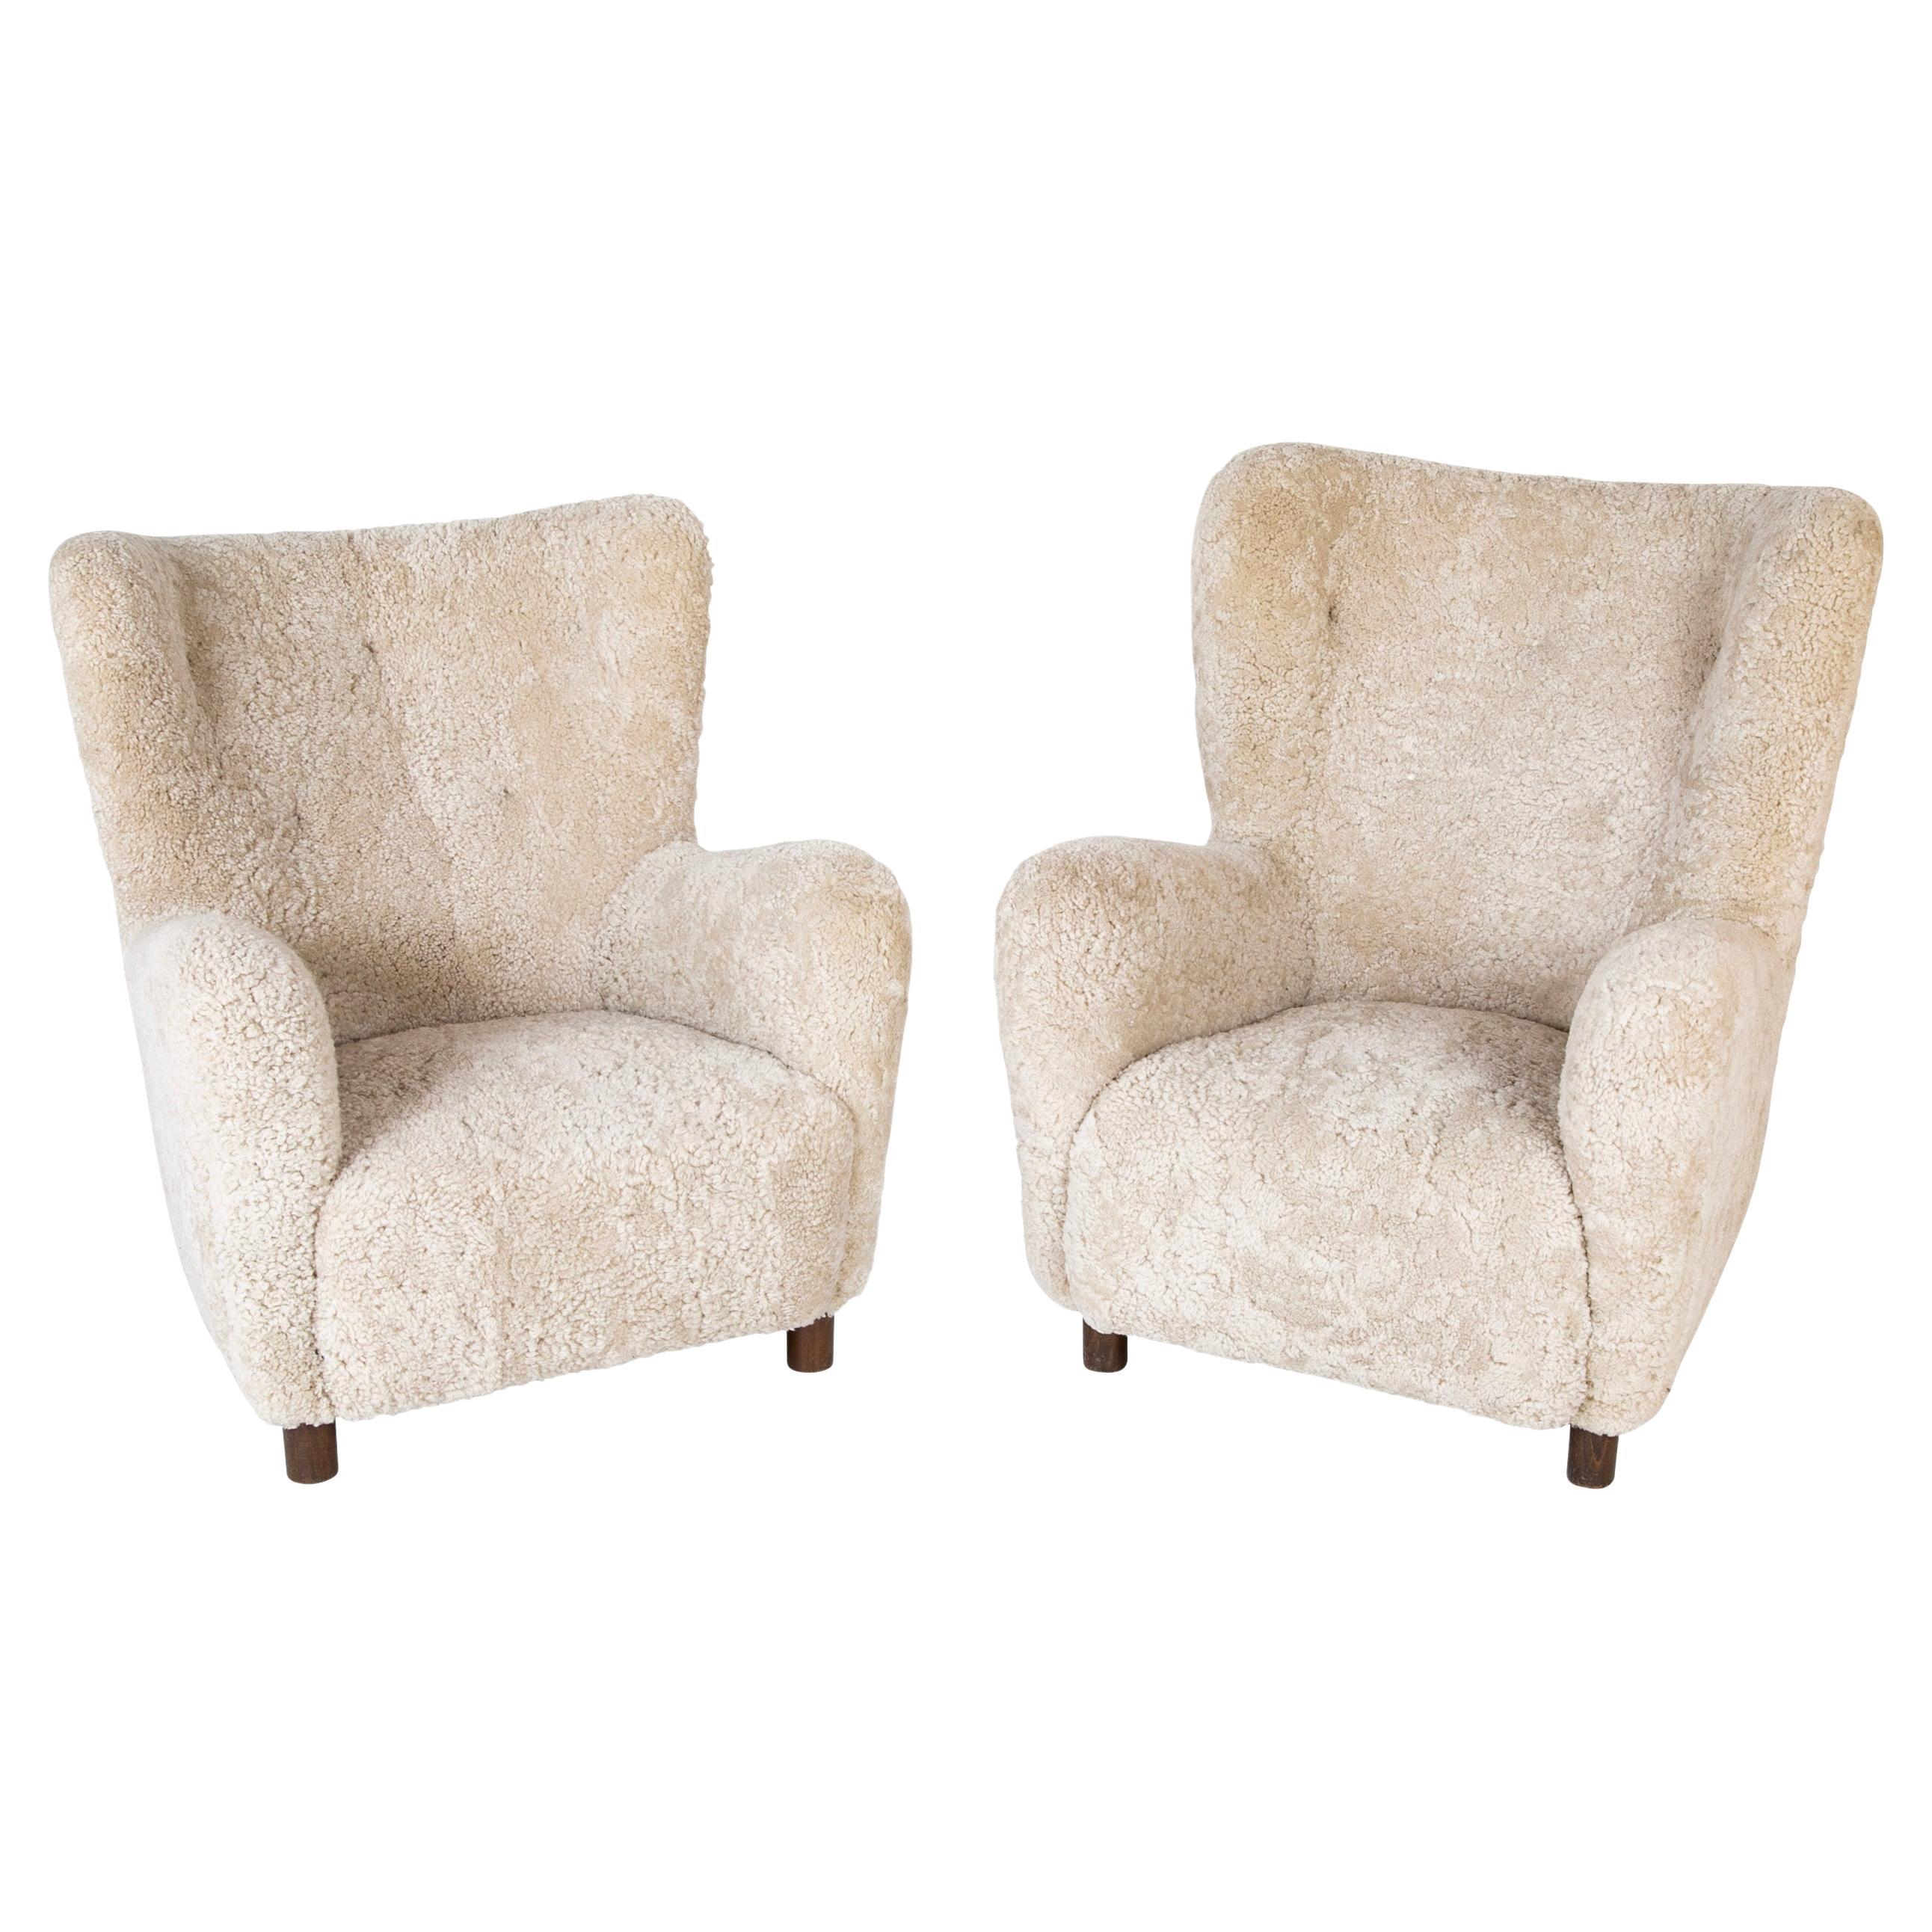 Pair of Armchairs in White Sheepskin Upholstery in the Style of Mogens Lassen For Sale